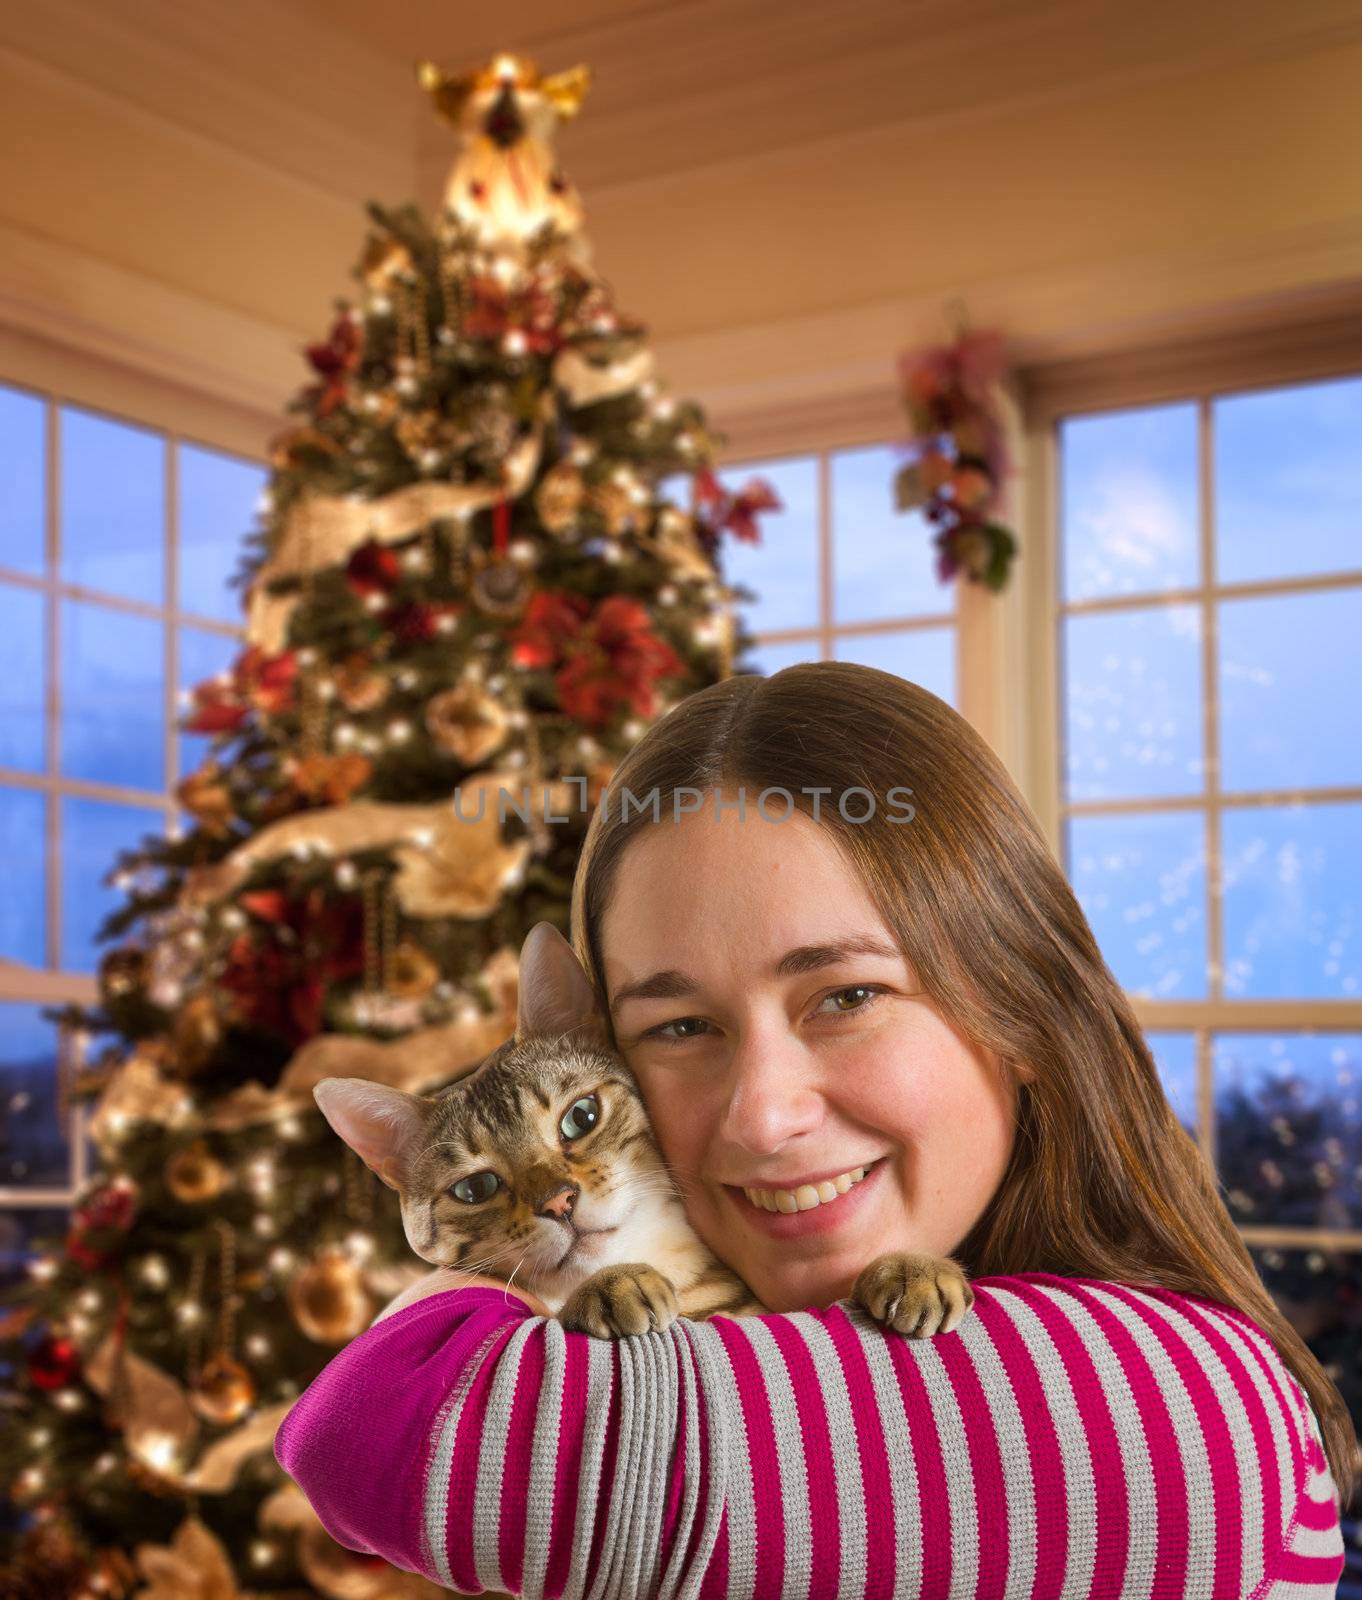 Bengal cat on girls arm by steheap